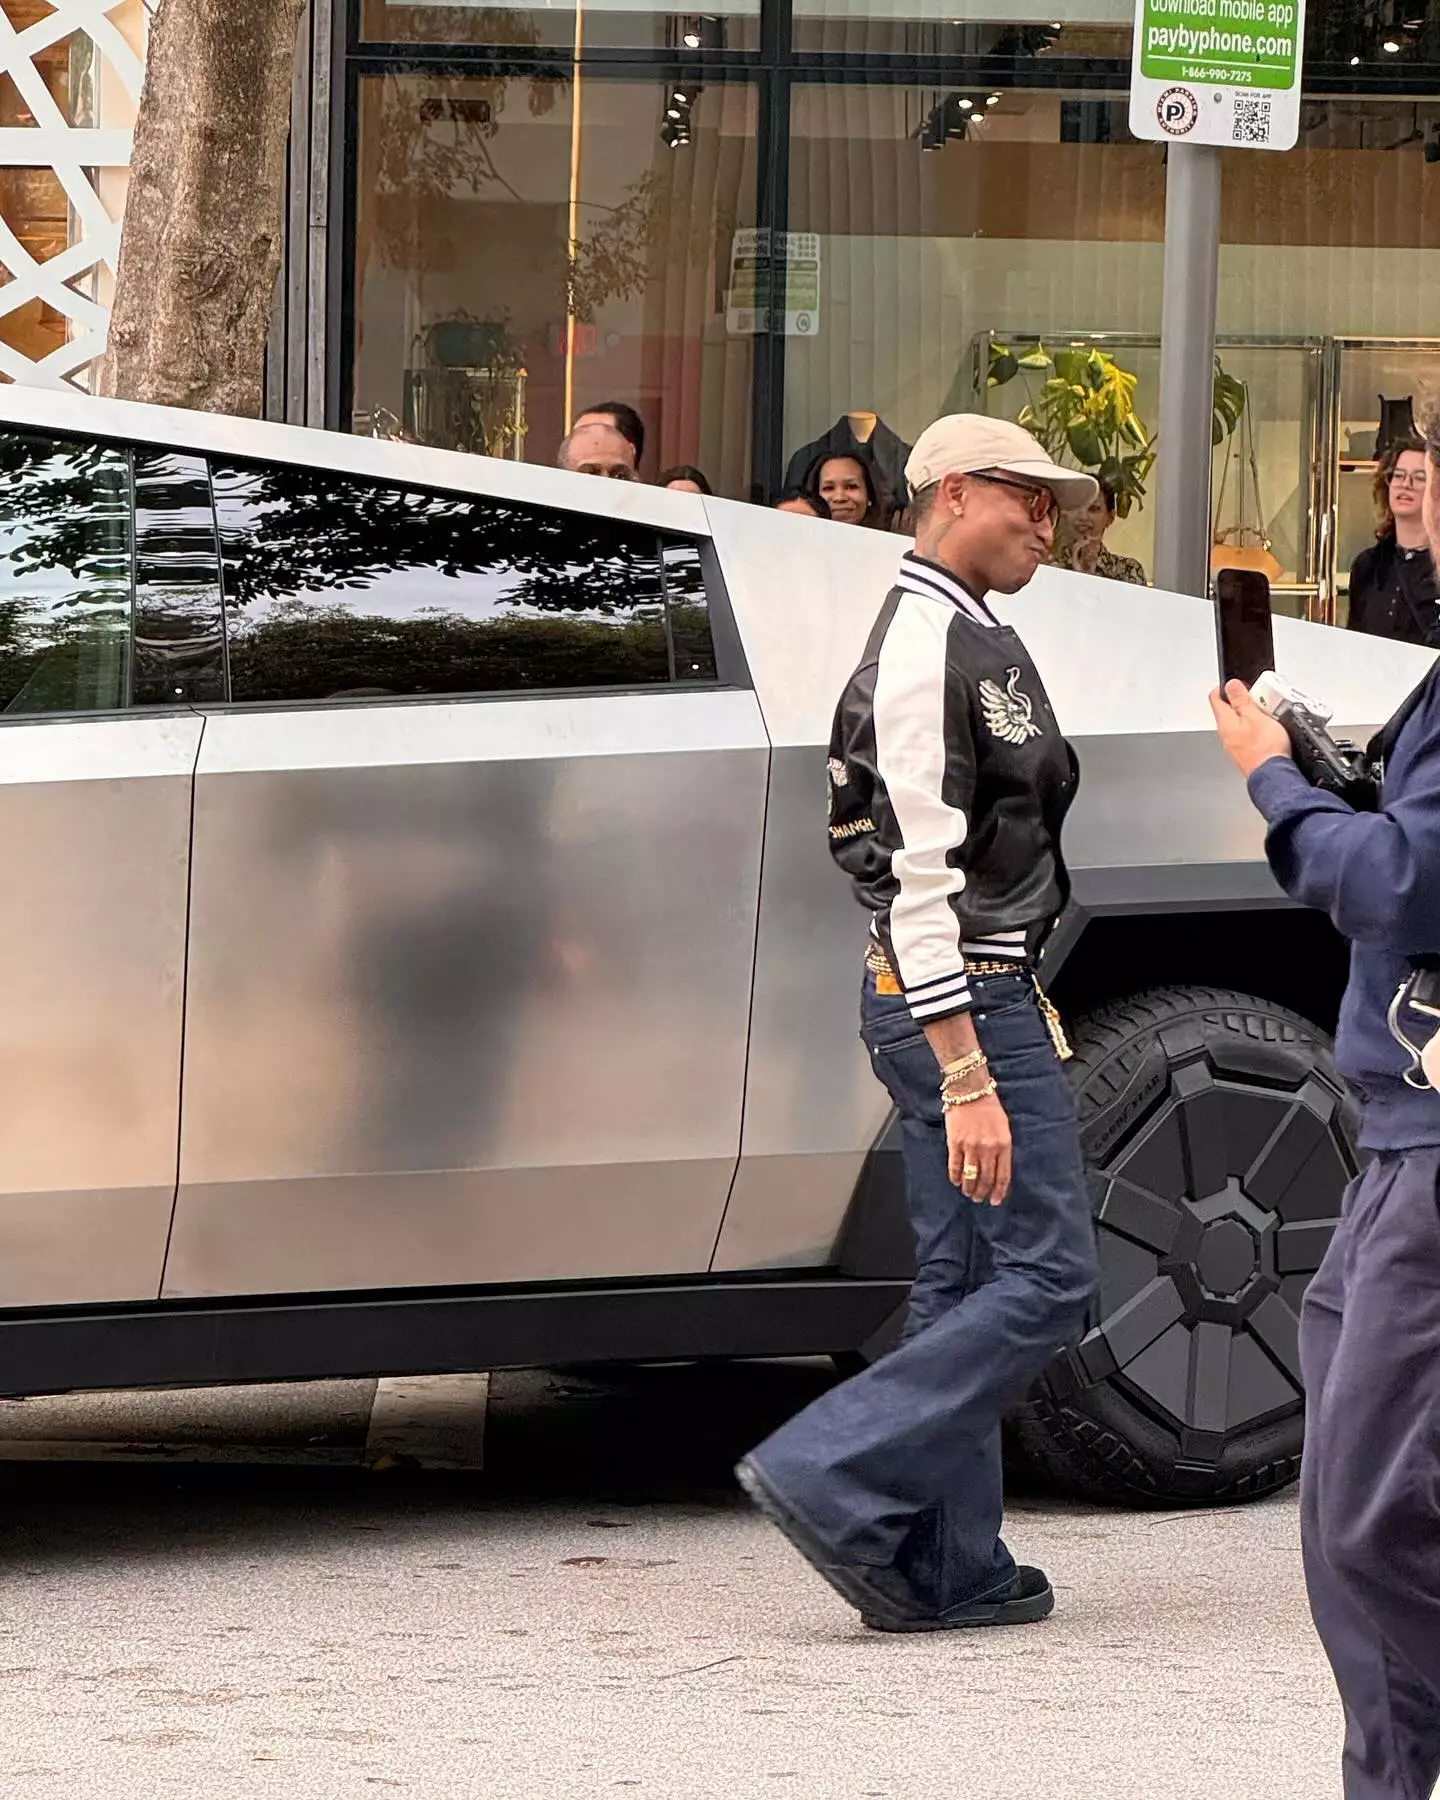 Pharrell cut it close to hitting the other car.